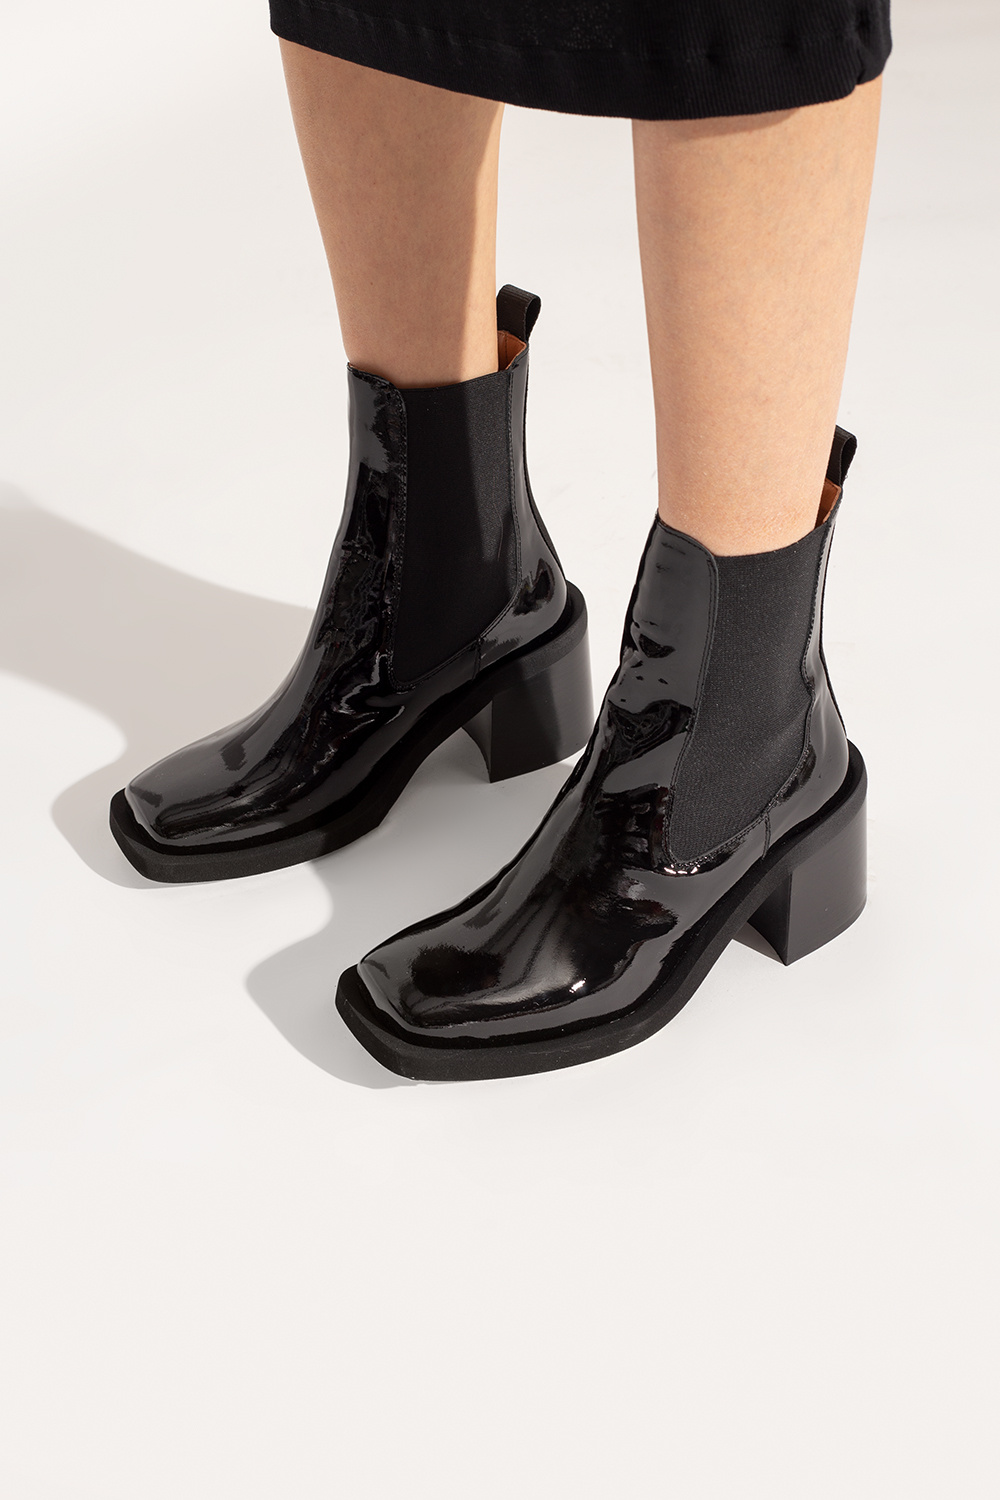 Ganni Patent-leather ankle boots | Women's Shoes | Vitkac